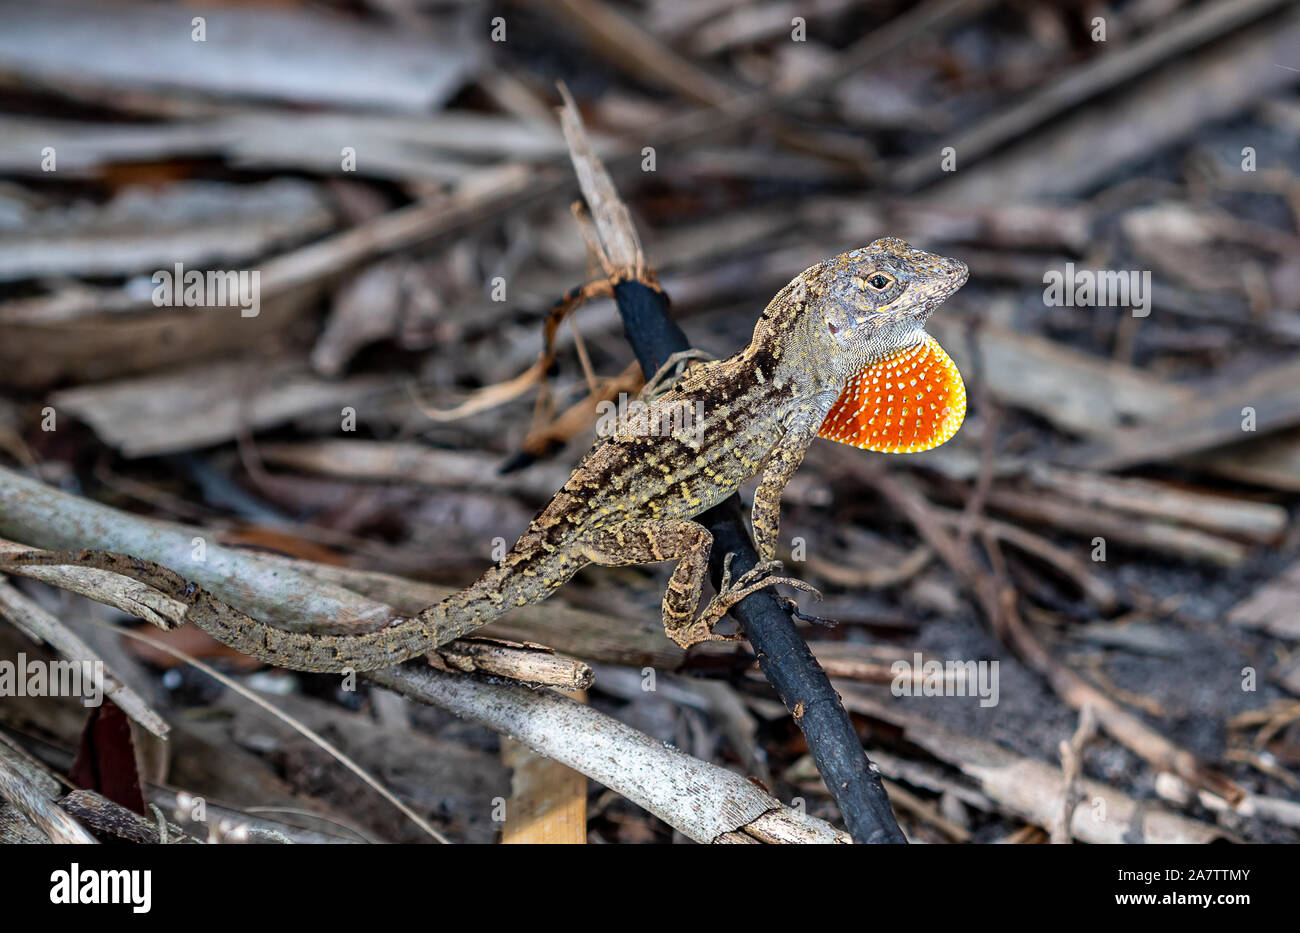 Brown Florida reptile stands his ground as another anole approaches Stock Photo